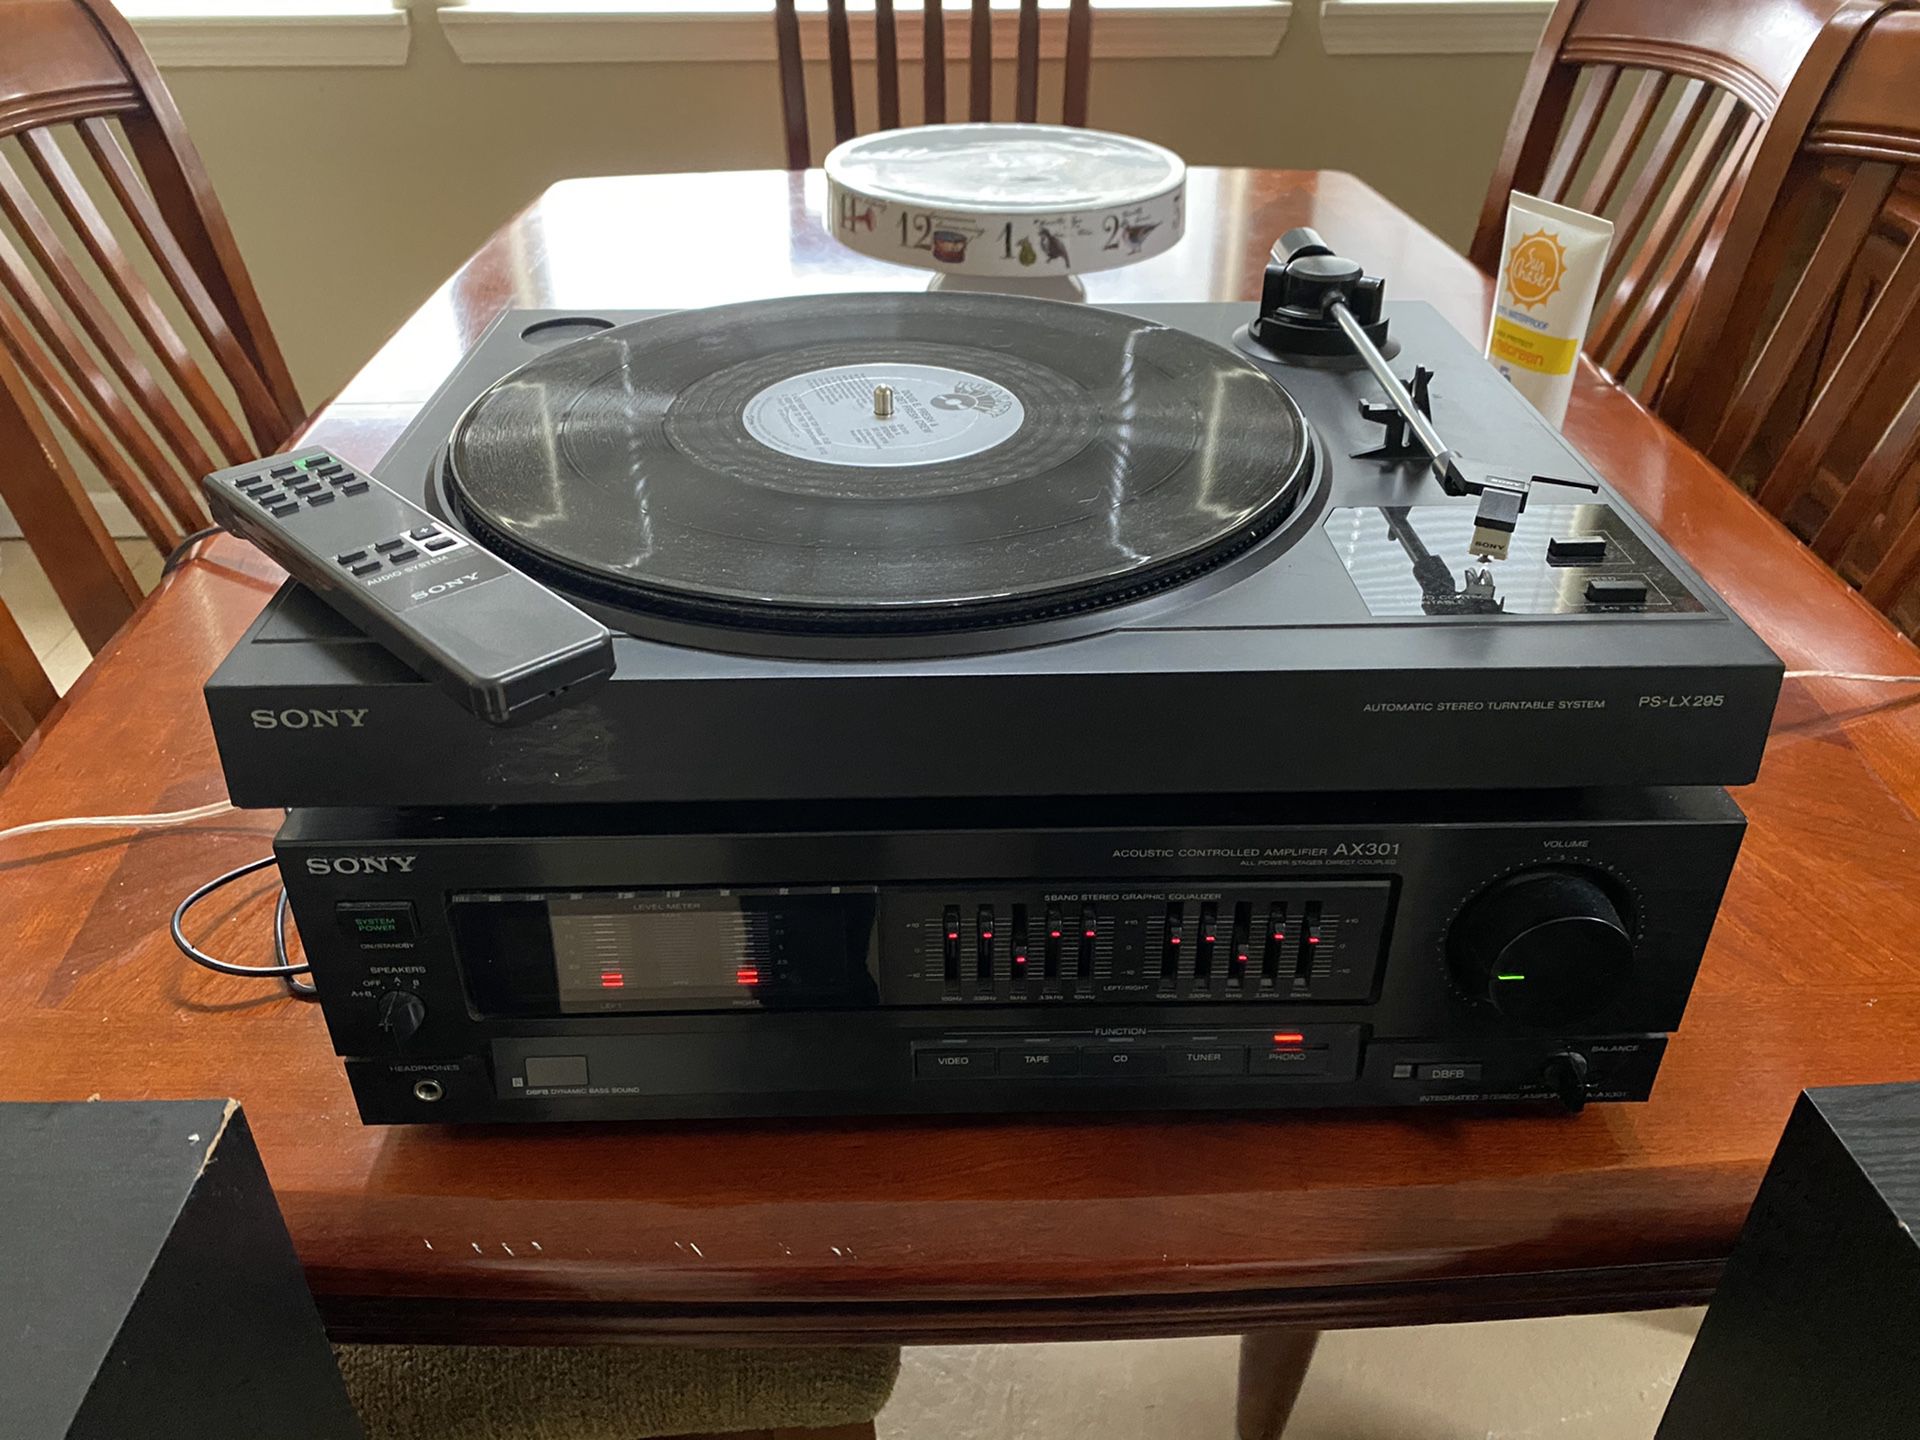 Sony 1993 stereo component system pl-lx295, ax-301